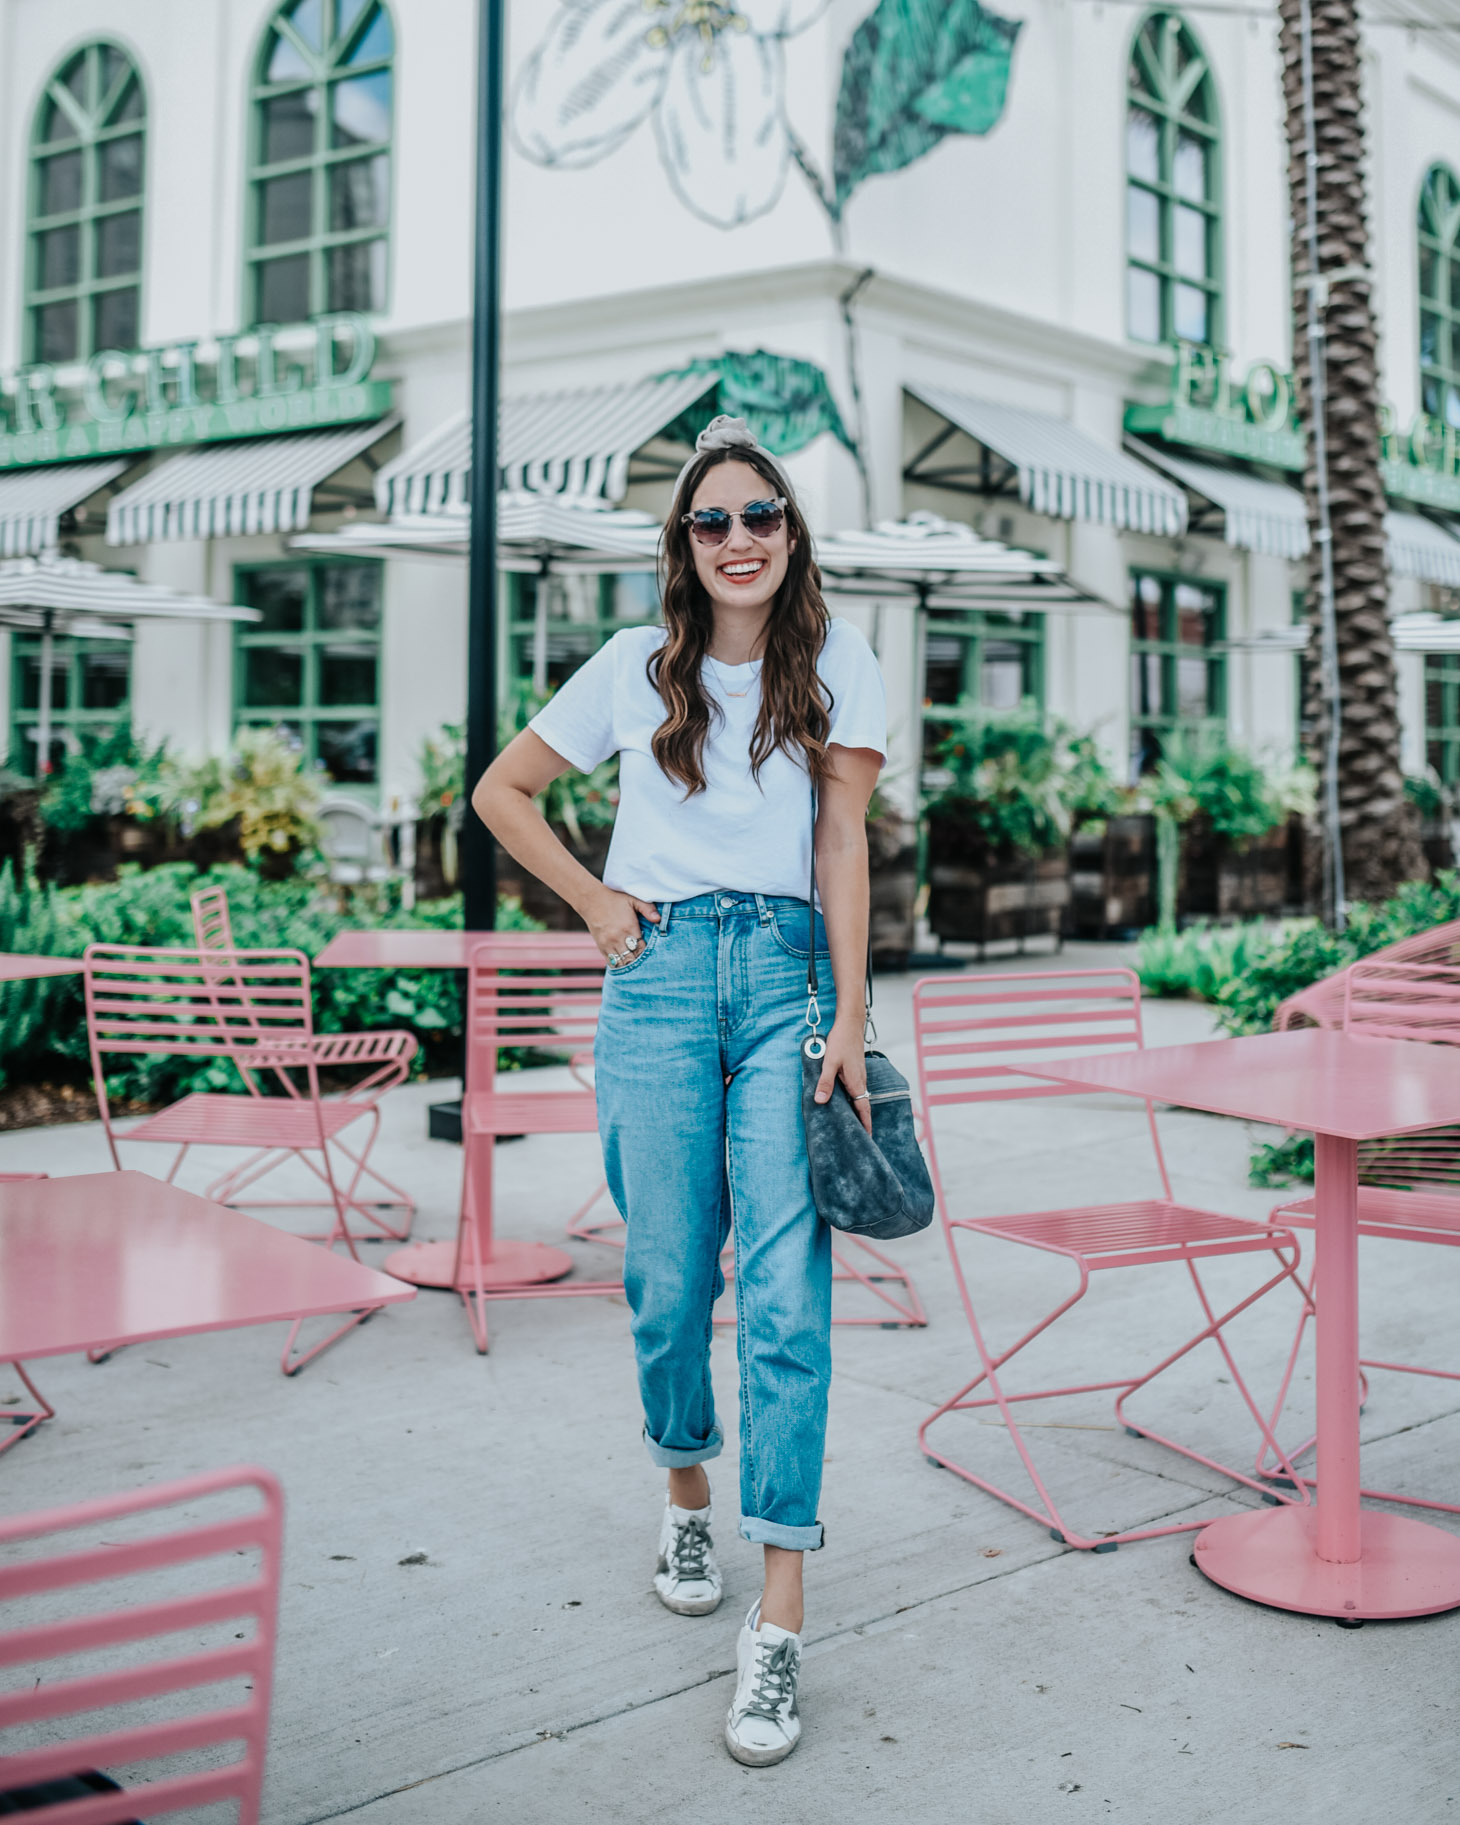 Basic Wardrobe Essentials for every mom featured by top US fashion blog, Lone Star Looking Glass: image of a woman wearing Everlane Straight jeans, Golden Goose sneakers, a knot headband, a crossbody bag and an Everlane white tee.